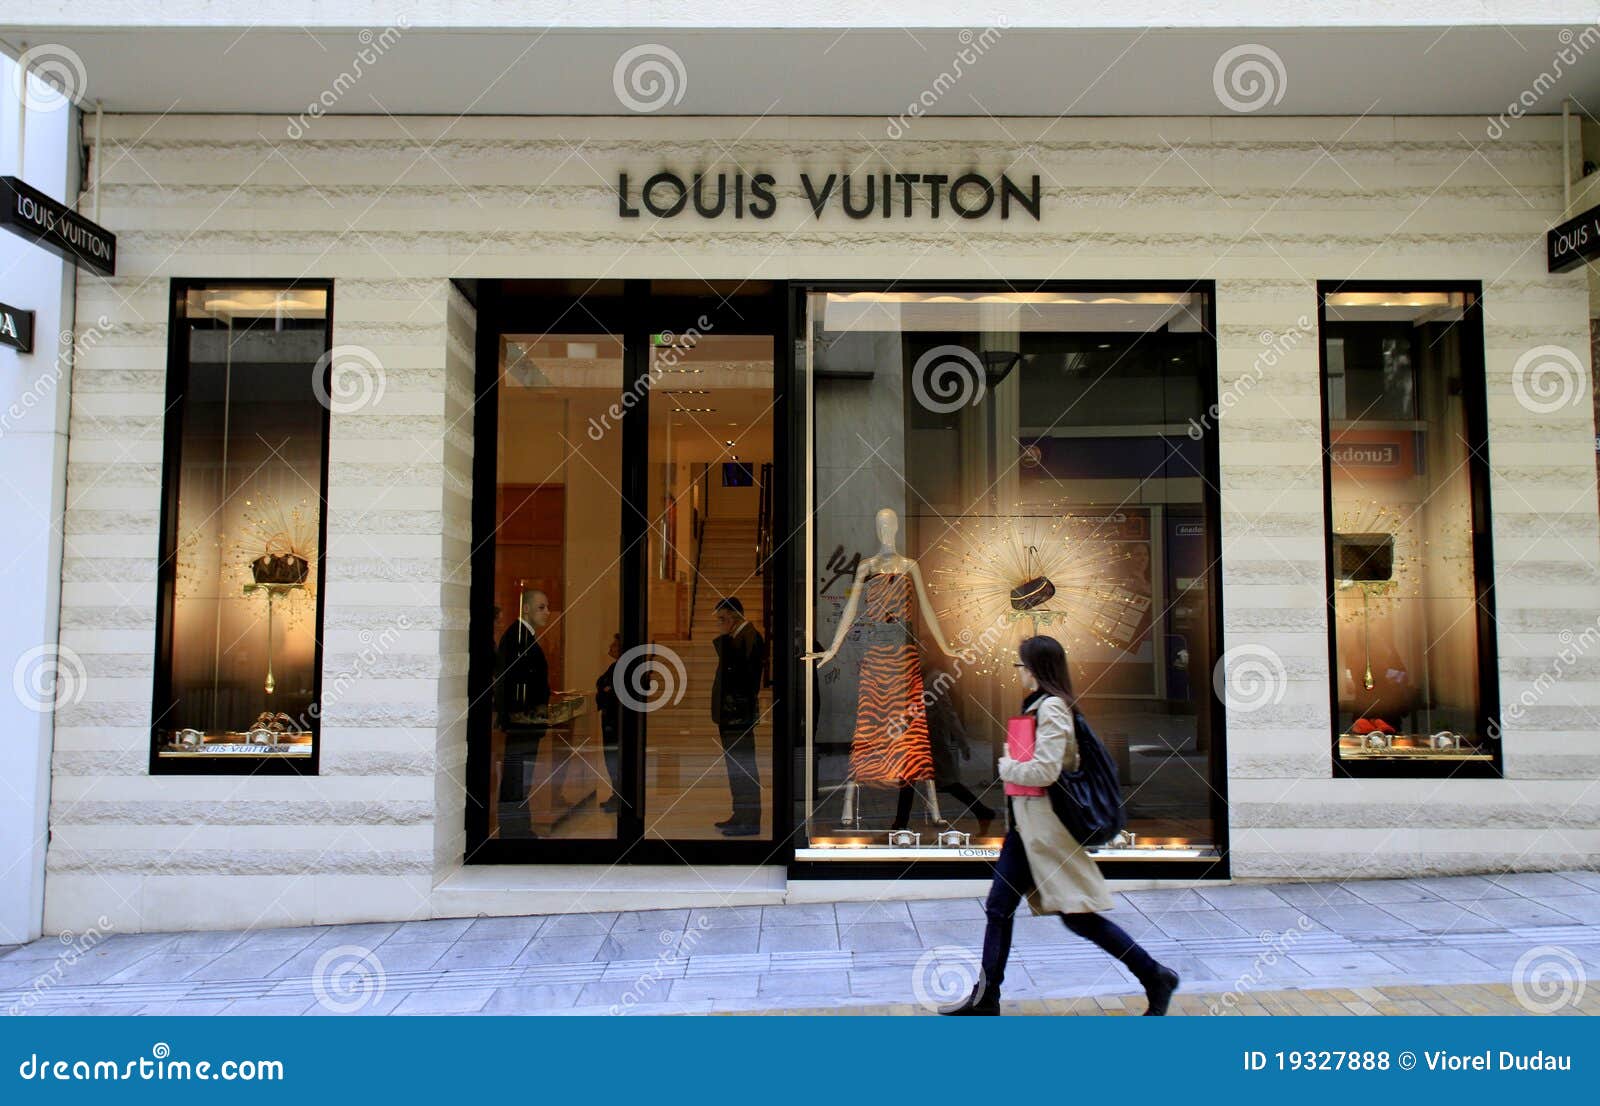 Louis Vuitton store editorial stock photo. Image of clothes - 19327888